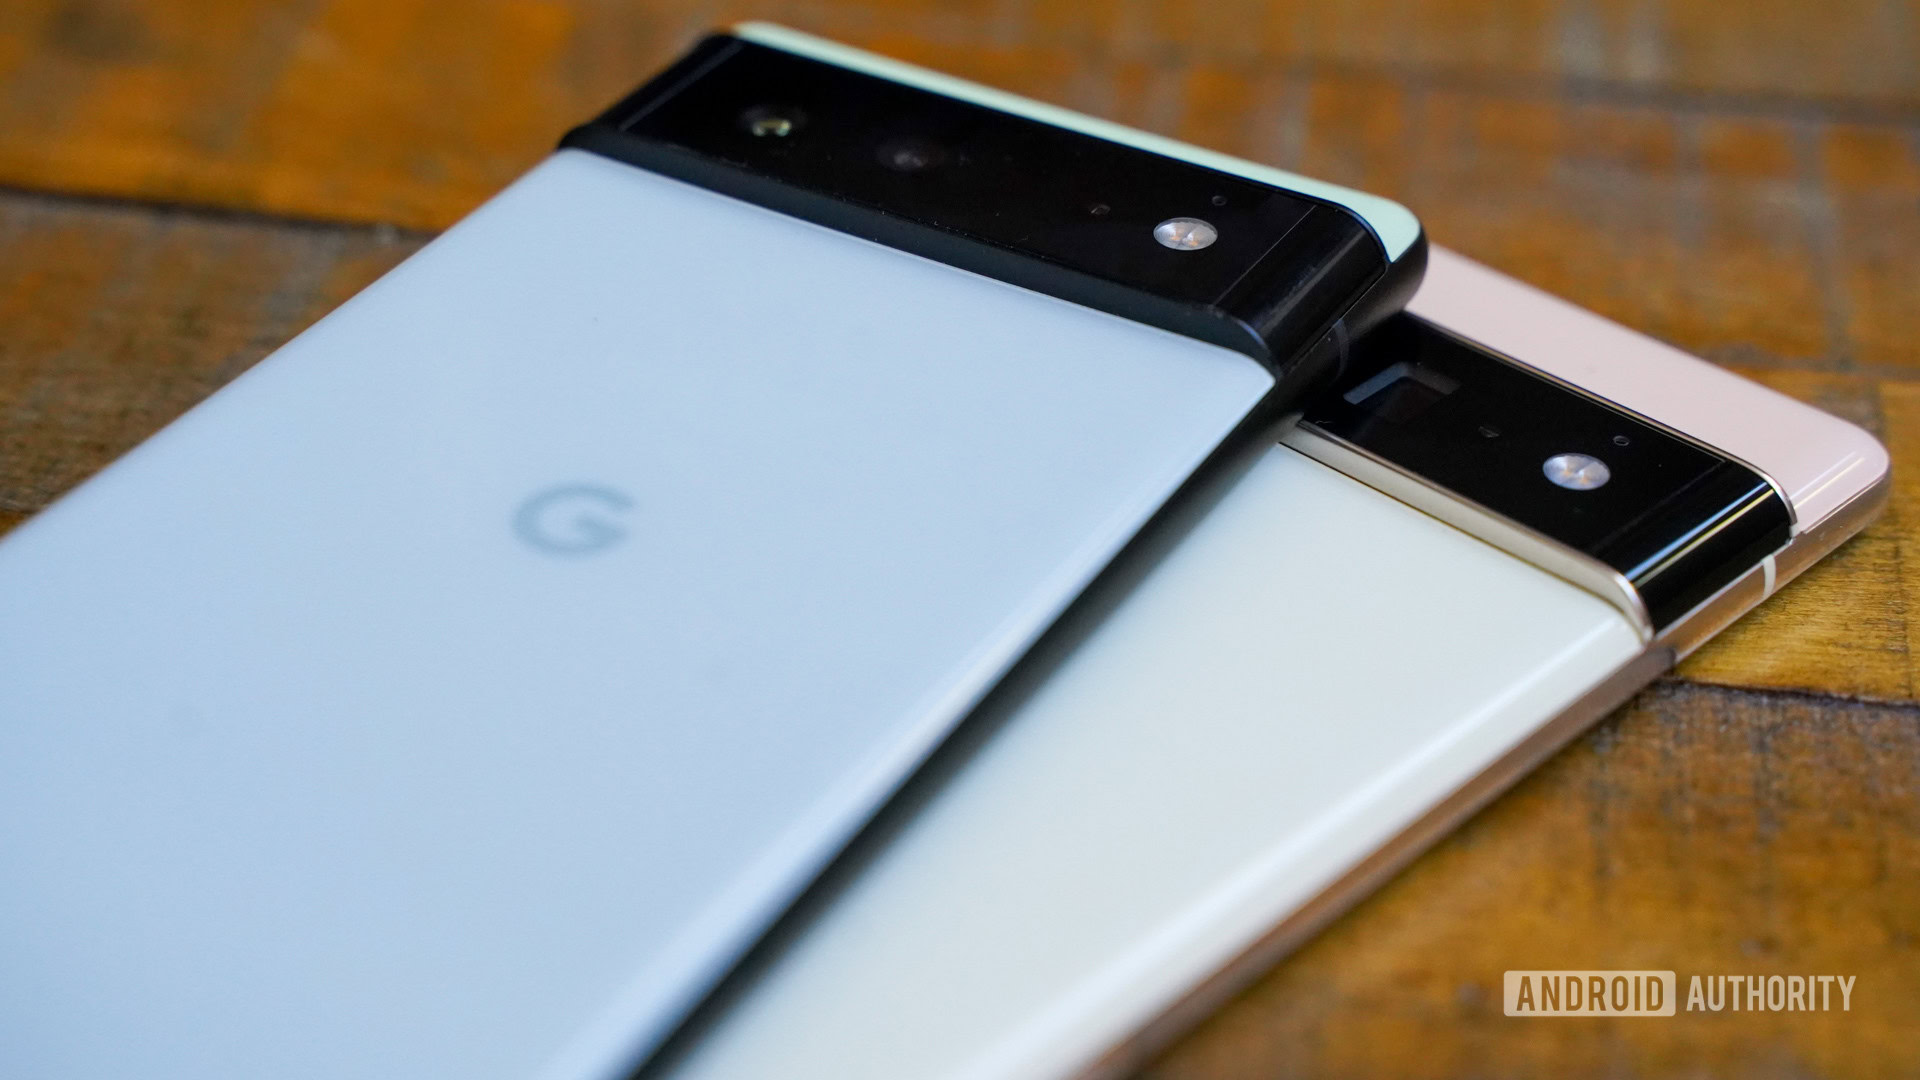 Google Pixel 6 buyer's guide: Price, specs, release date - Android Authority